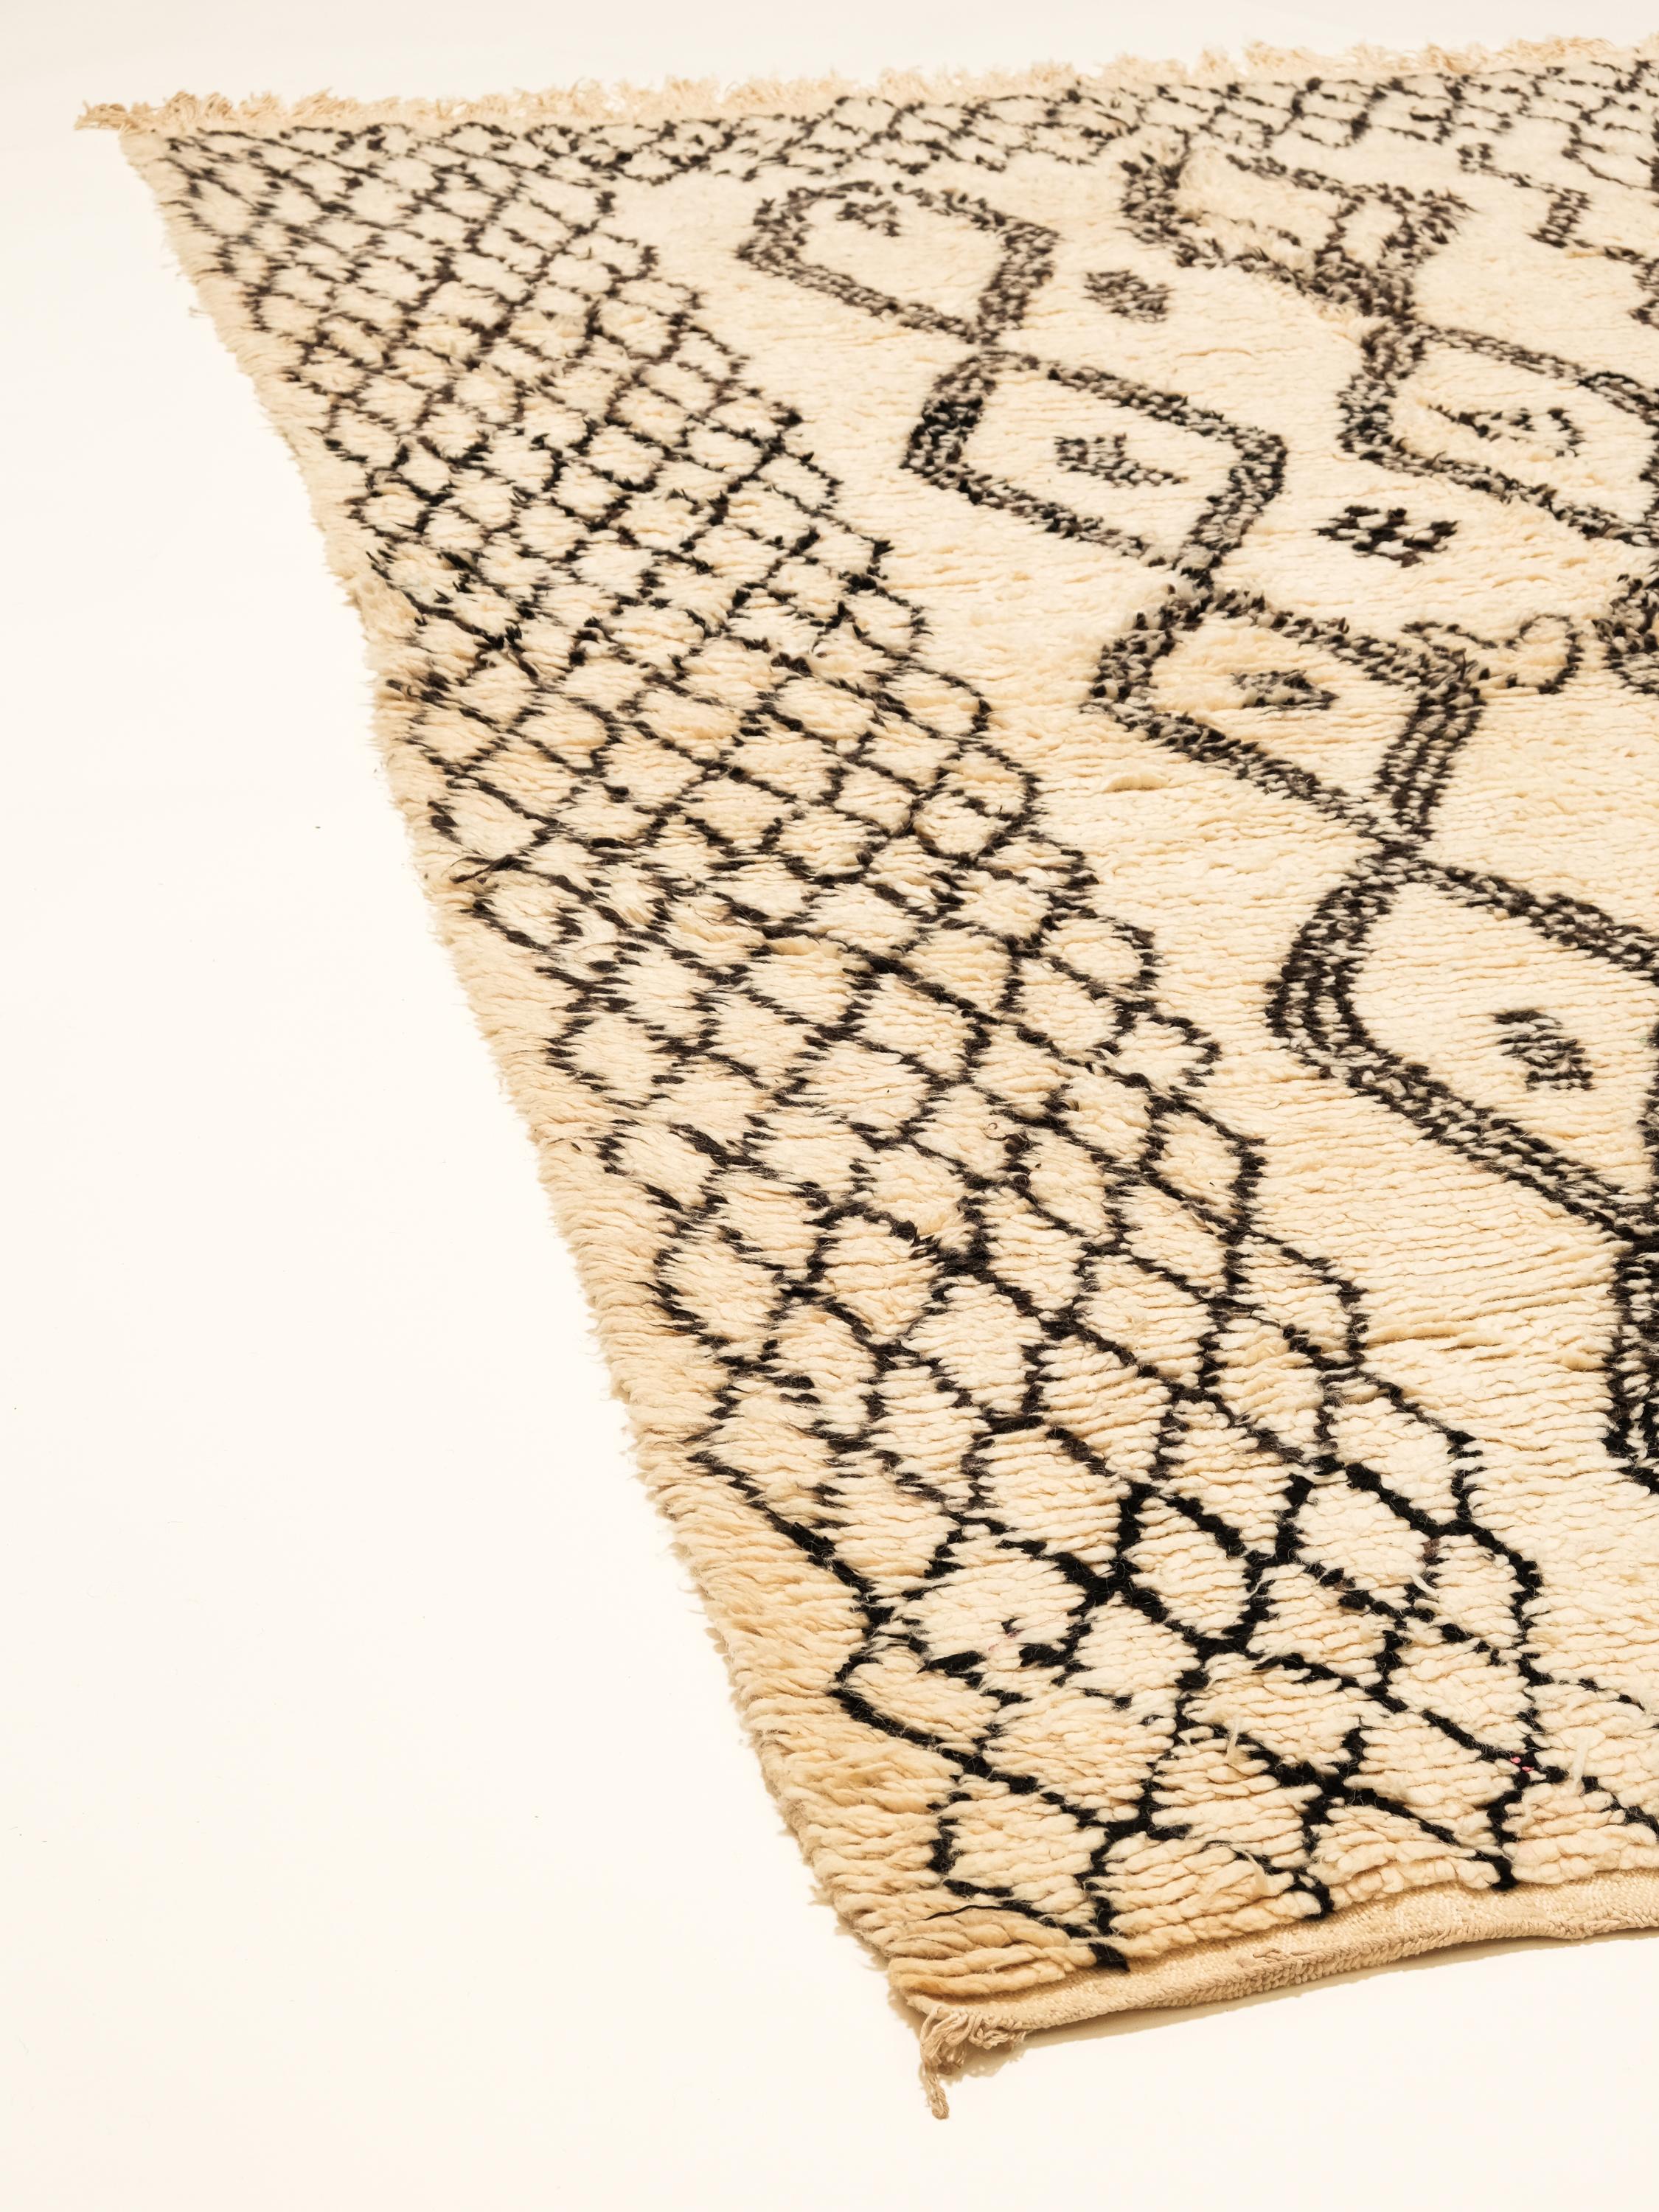 A beautiful vintage Moroccan rug from the Beni Ourain tribe. This charming handwoven wool piece has the perfect sandy ivory color and contains traditional diamond motifs latticed throughout the field in a golden hue. A one of a kind rug that will